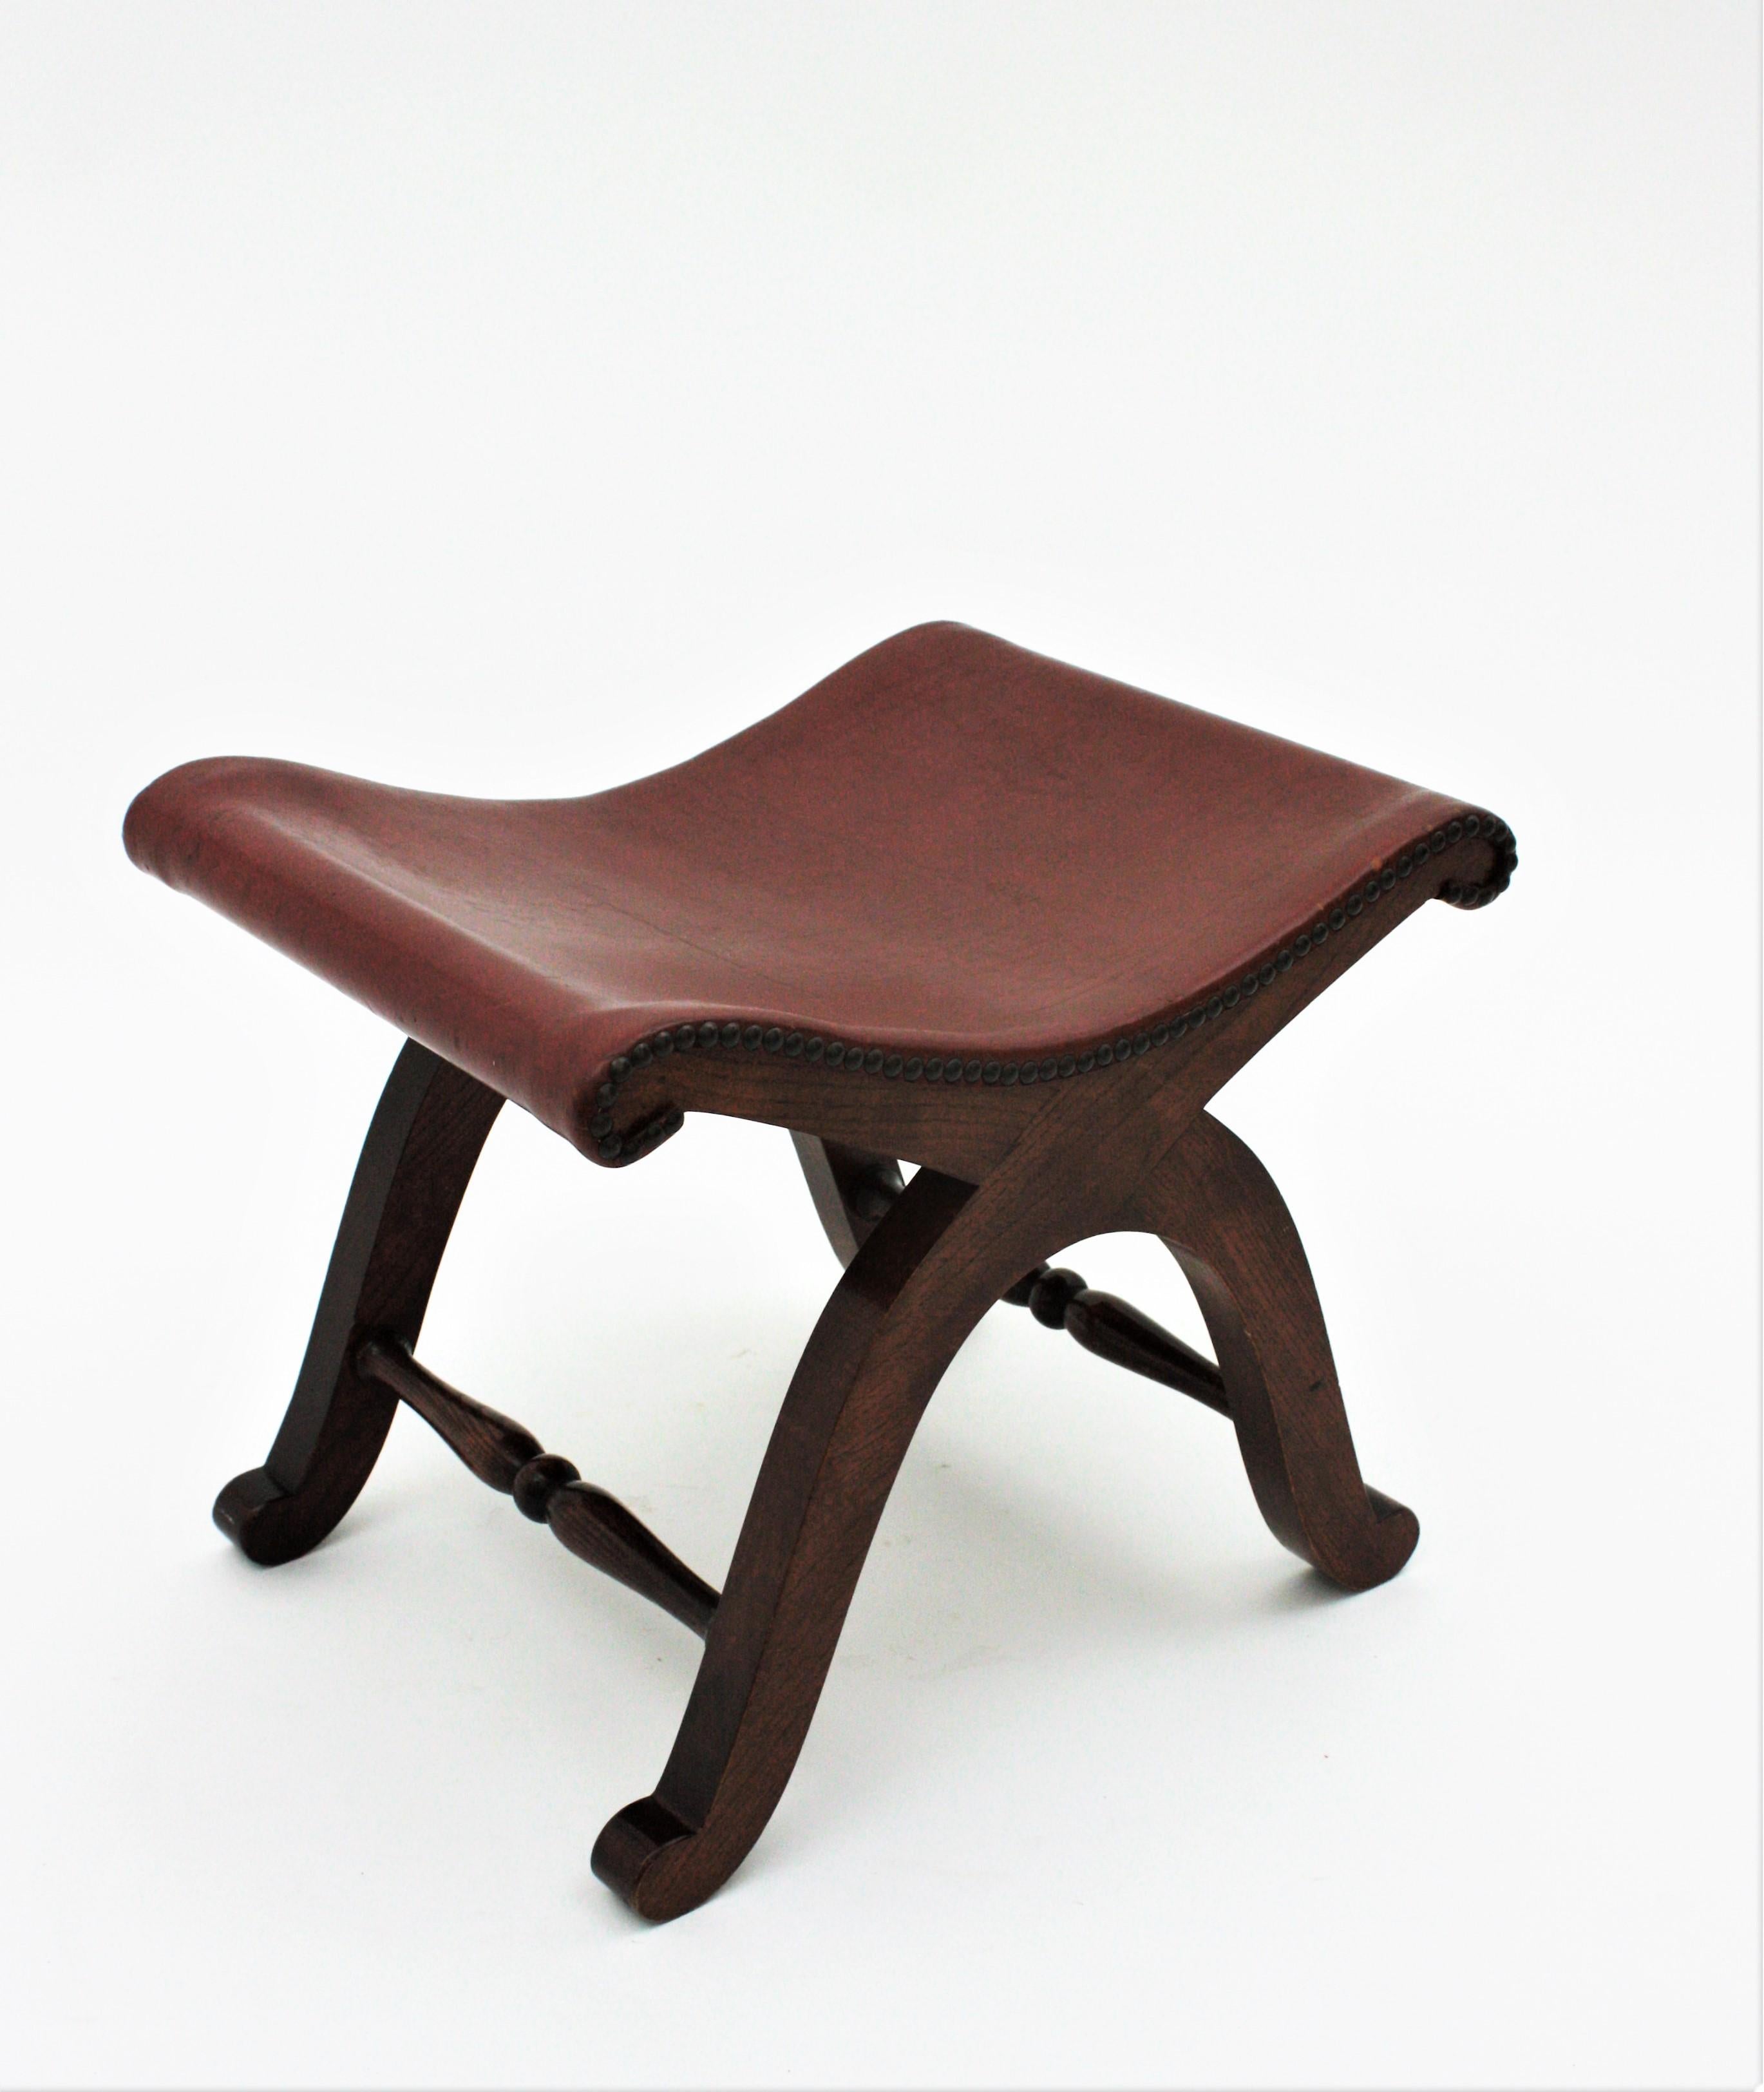 Spanish Curule Stool by Pierre Lottier for Valenti, Wood and Leather